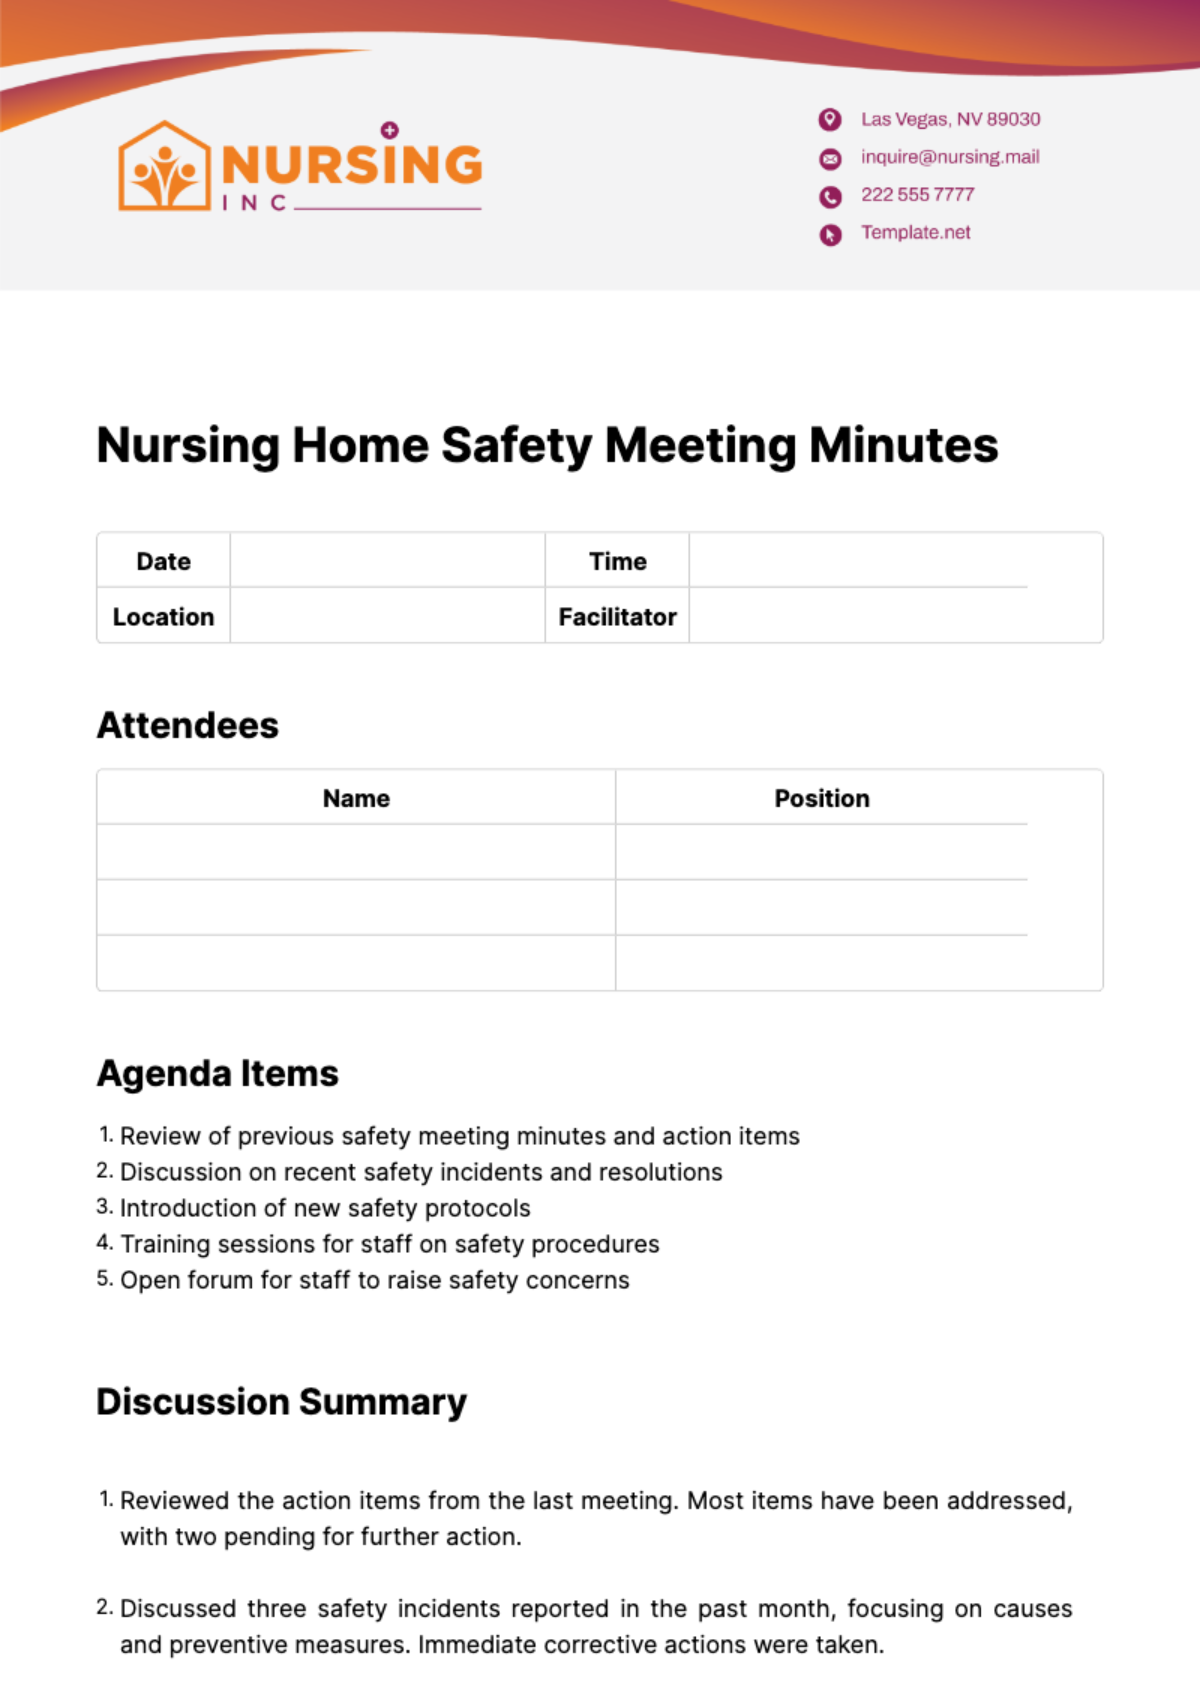 Nursing Home Safety Meeting Minutes Template